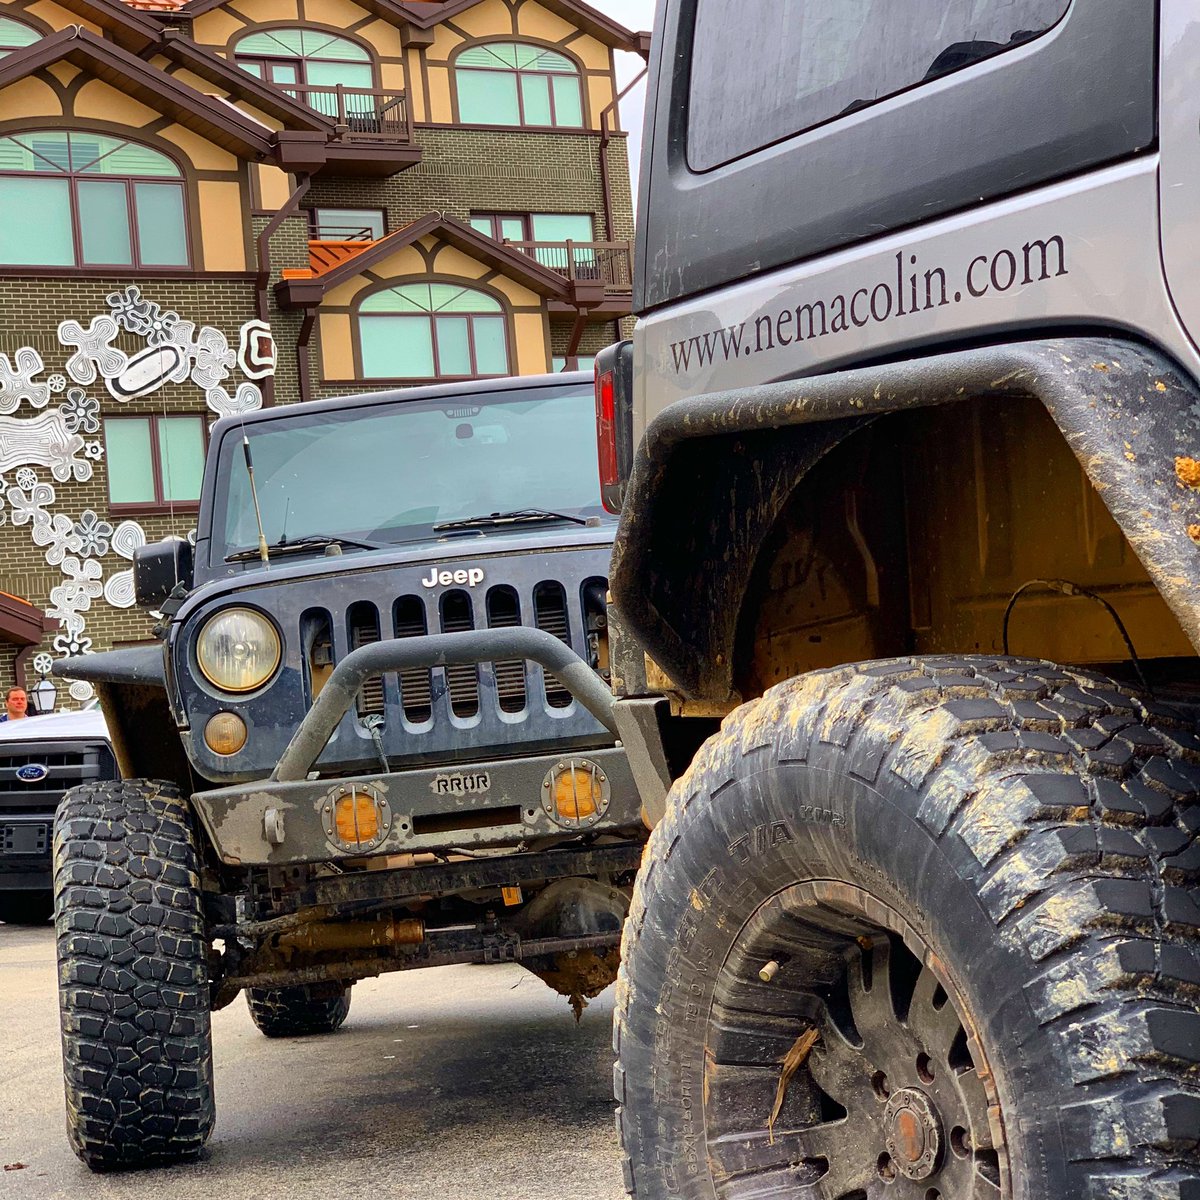 About to hit the #offroad trails at #nemacolin in the #laurelhighlands with #matpra2018 - fun with the #jeepwranglerrubicon